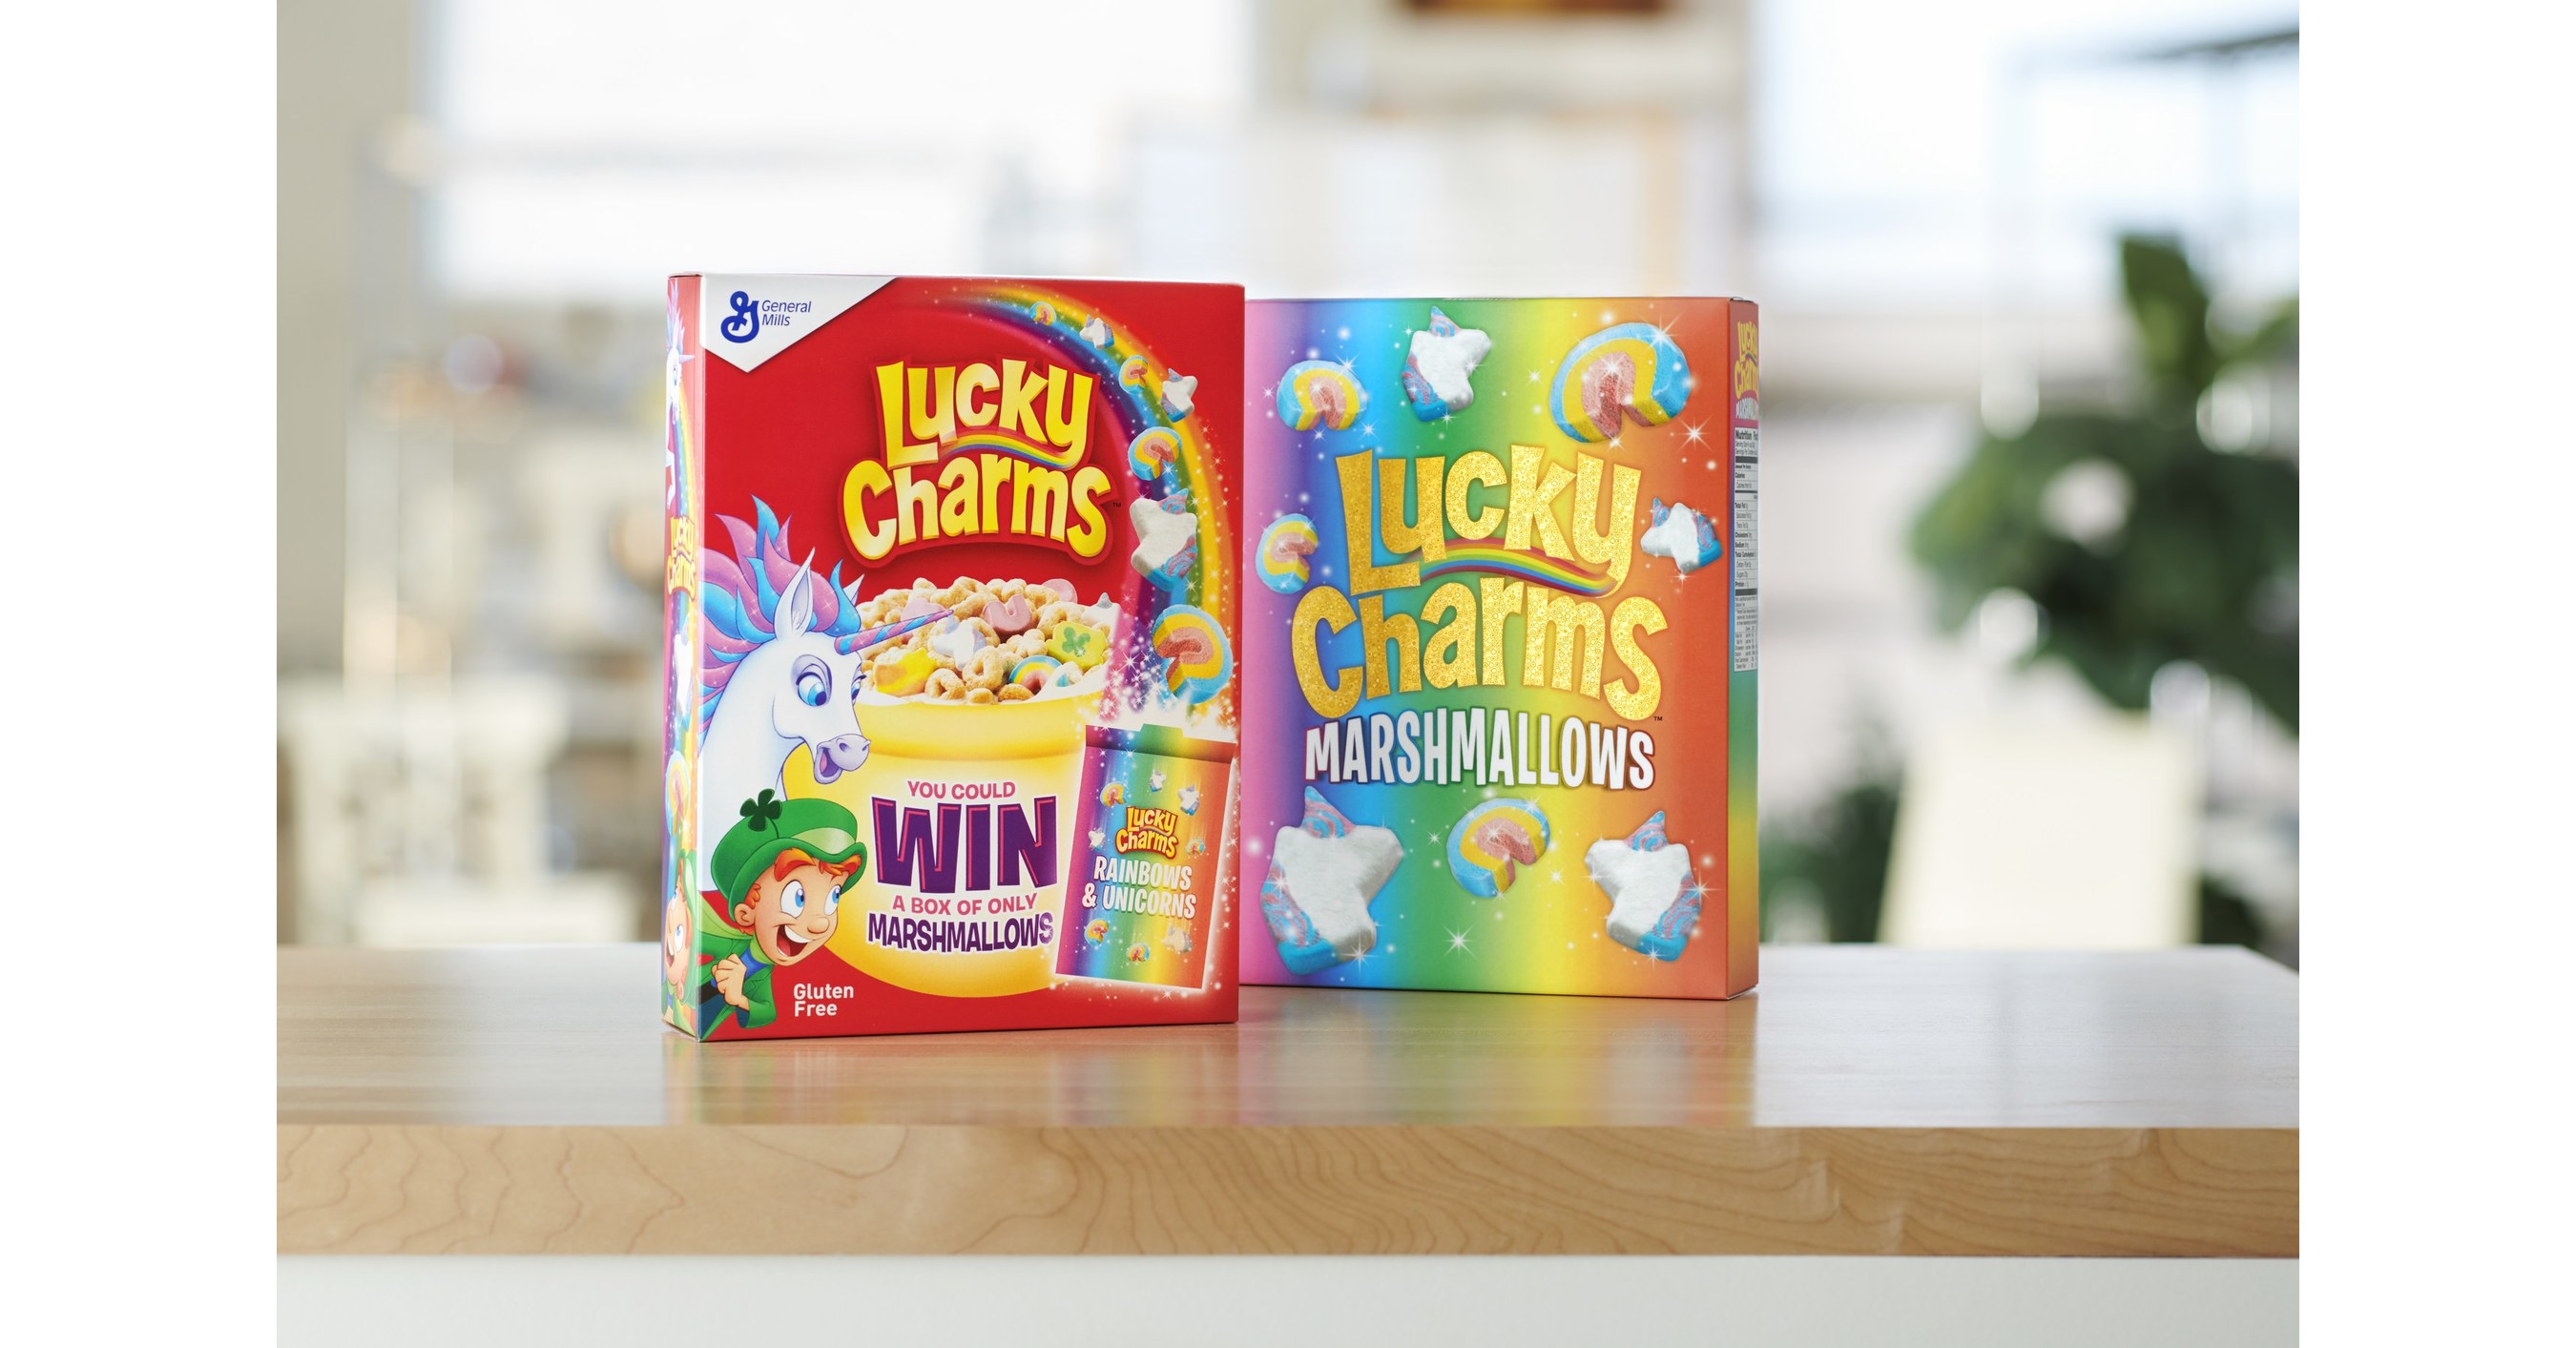 lucky charms cereal box